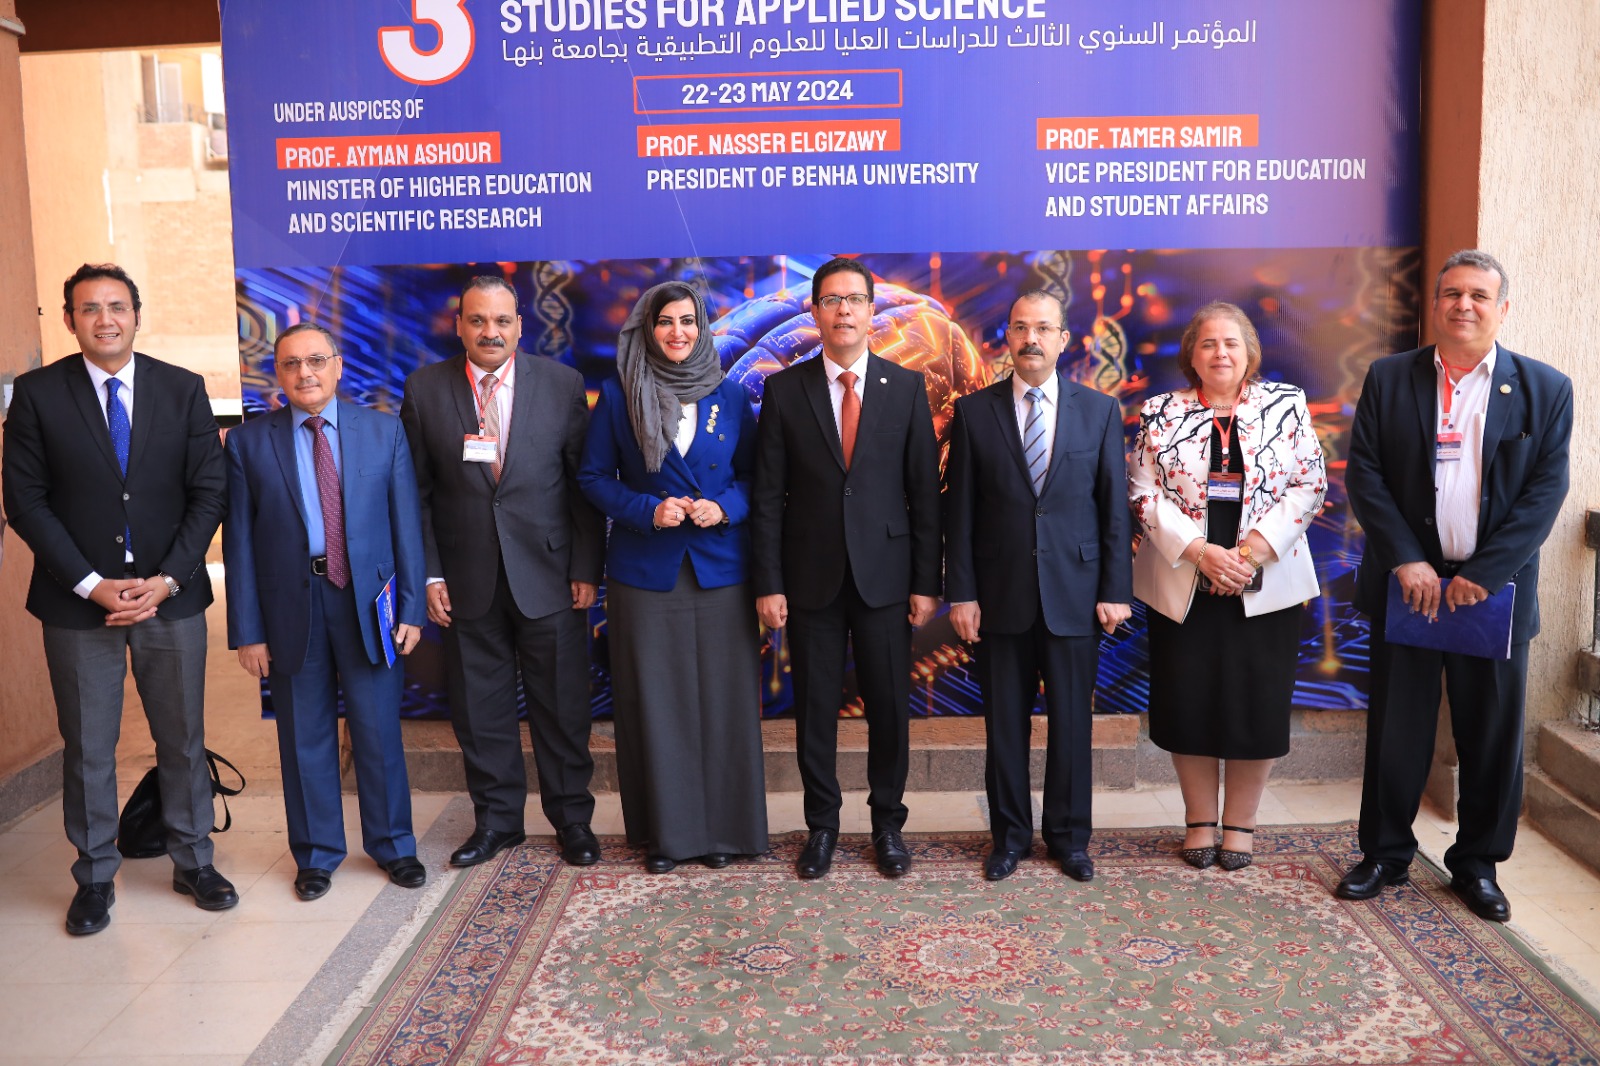 BU launches activities of The Third Annual Conference of Postgraduate Studies for Applied Science at Benha University